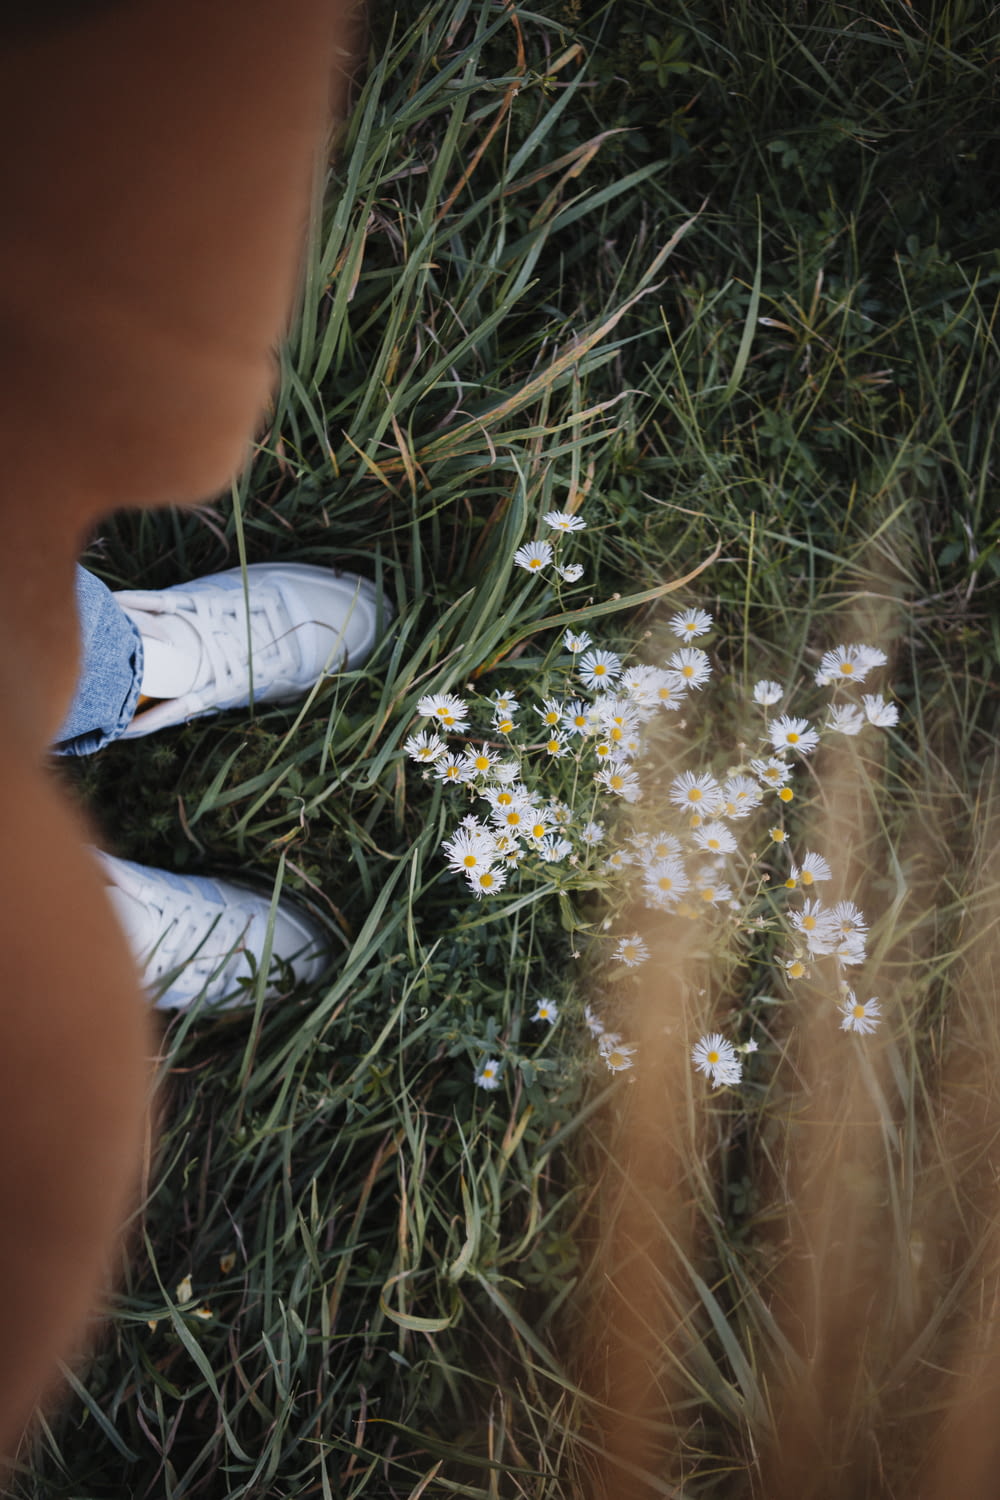 a pair of white shoes sitting on top of a grass covered field